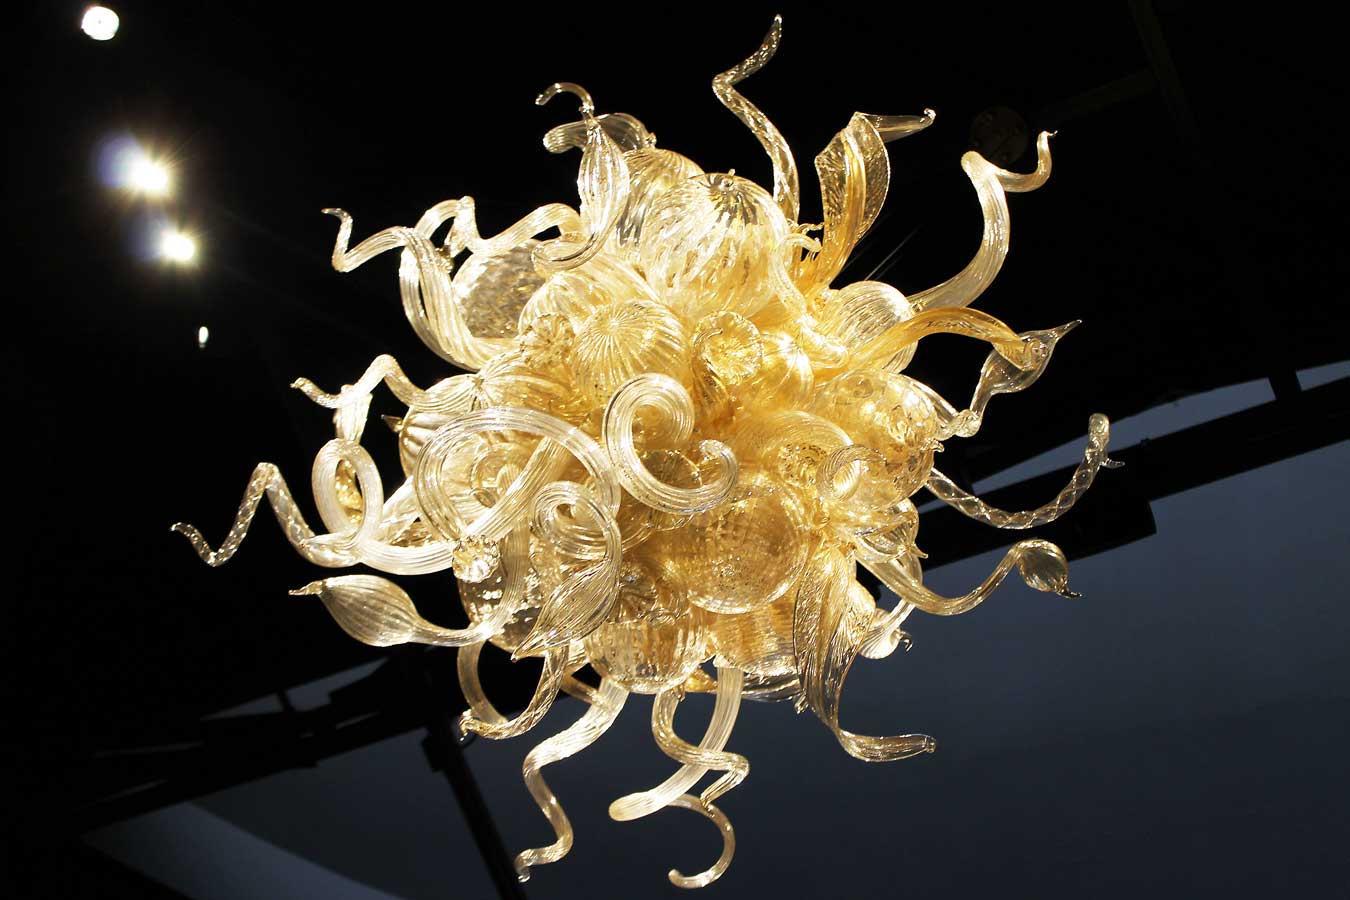 "Lily Gold Chandelier" by Dale Chihuly (at the Fort Wayne Museum of Art) // The Weekend Getaway You've Overlooked: Visit Fort Wayne, Indiana [via Wading in Big Shoes] // Located equidistantly from Chicago, Cincinnati, and Detroit, Fort Wayne, Indiana is a fun midwest destination that captures a perfect blend of city, nature, and local flavors! See what I experienced on my trip to Fort Wayne and learn what makes Indiana's second-largest city the perfect spot for a weekend getaway.